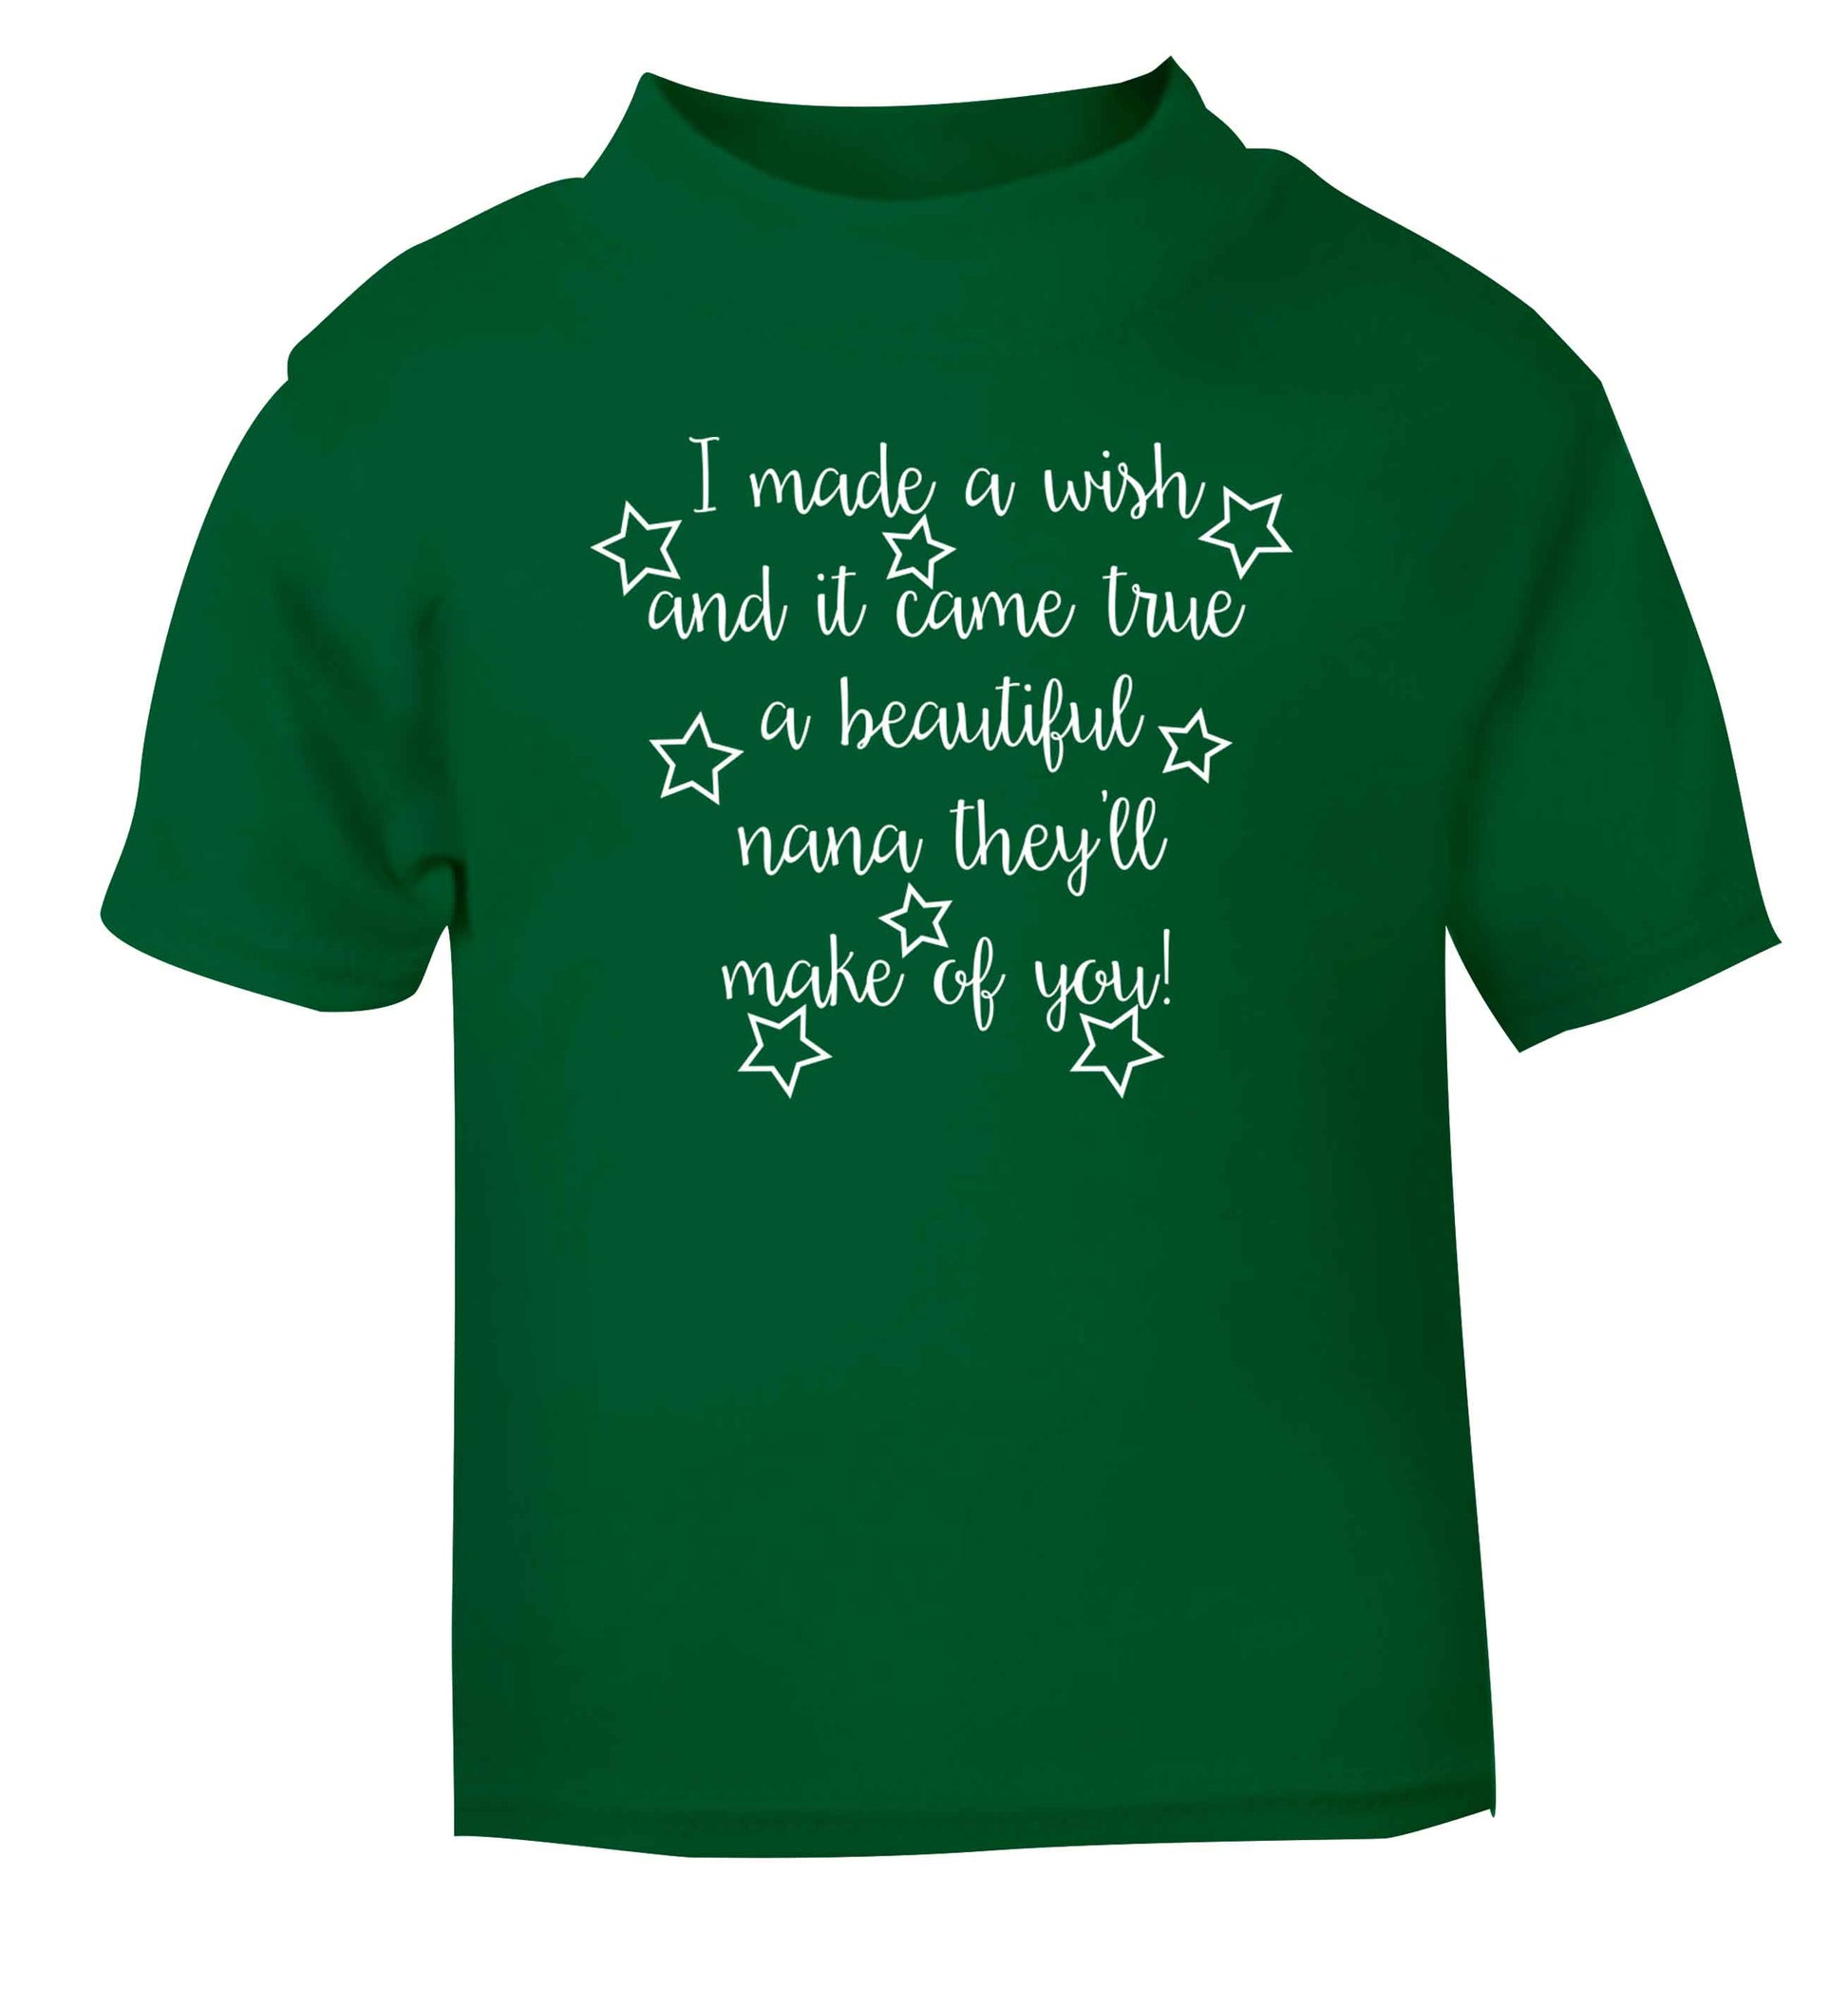 I made a wish and it came true a beautiful nana they'll make of you! green Baby Toddler Tshirt 2 Years